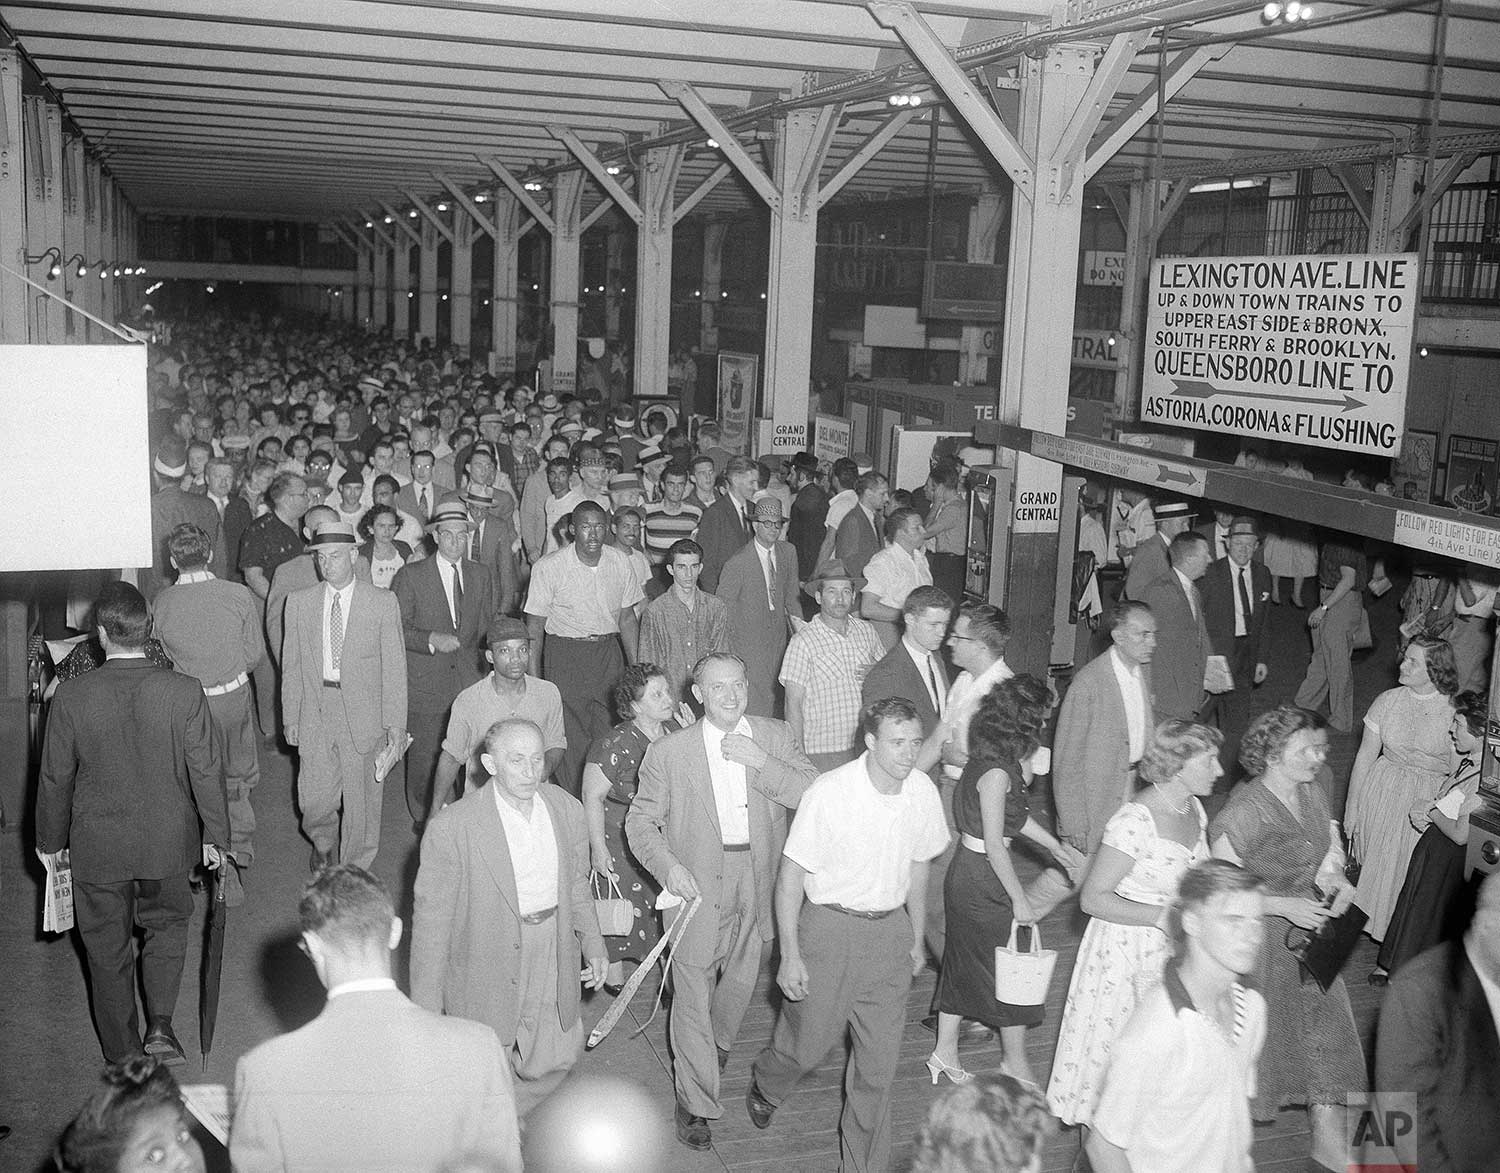  Crowds of homebound New Yorkers move slowly toward the Grand Central station of the IRT's Lexington Avenue line after leaving the crosstown shuttle during the peak of the rush hour, July 16, 1956. Flooding from water poured on the Wanamaker departme